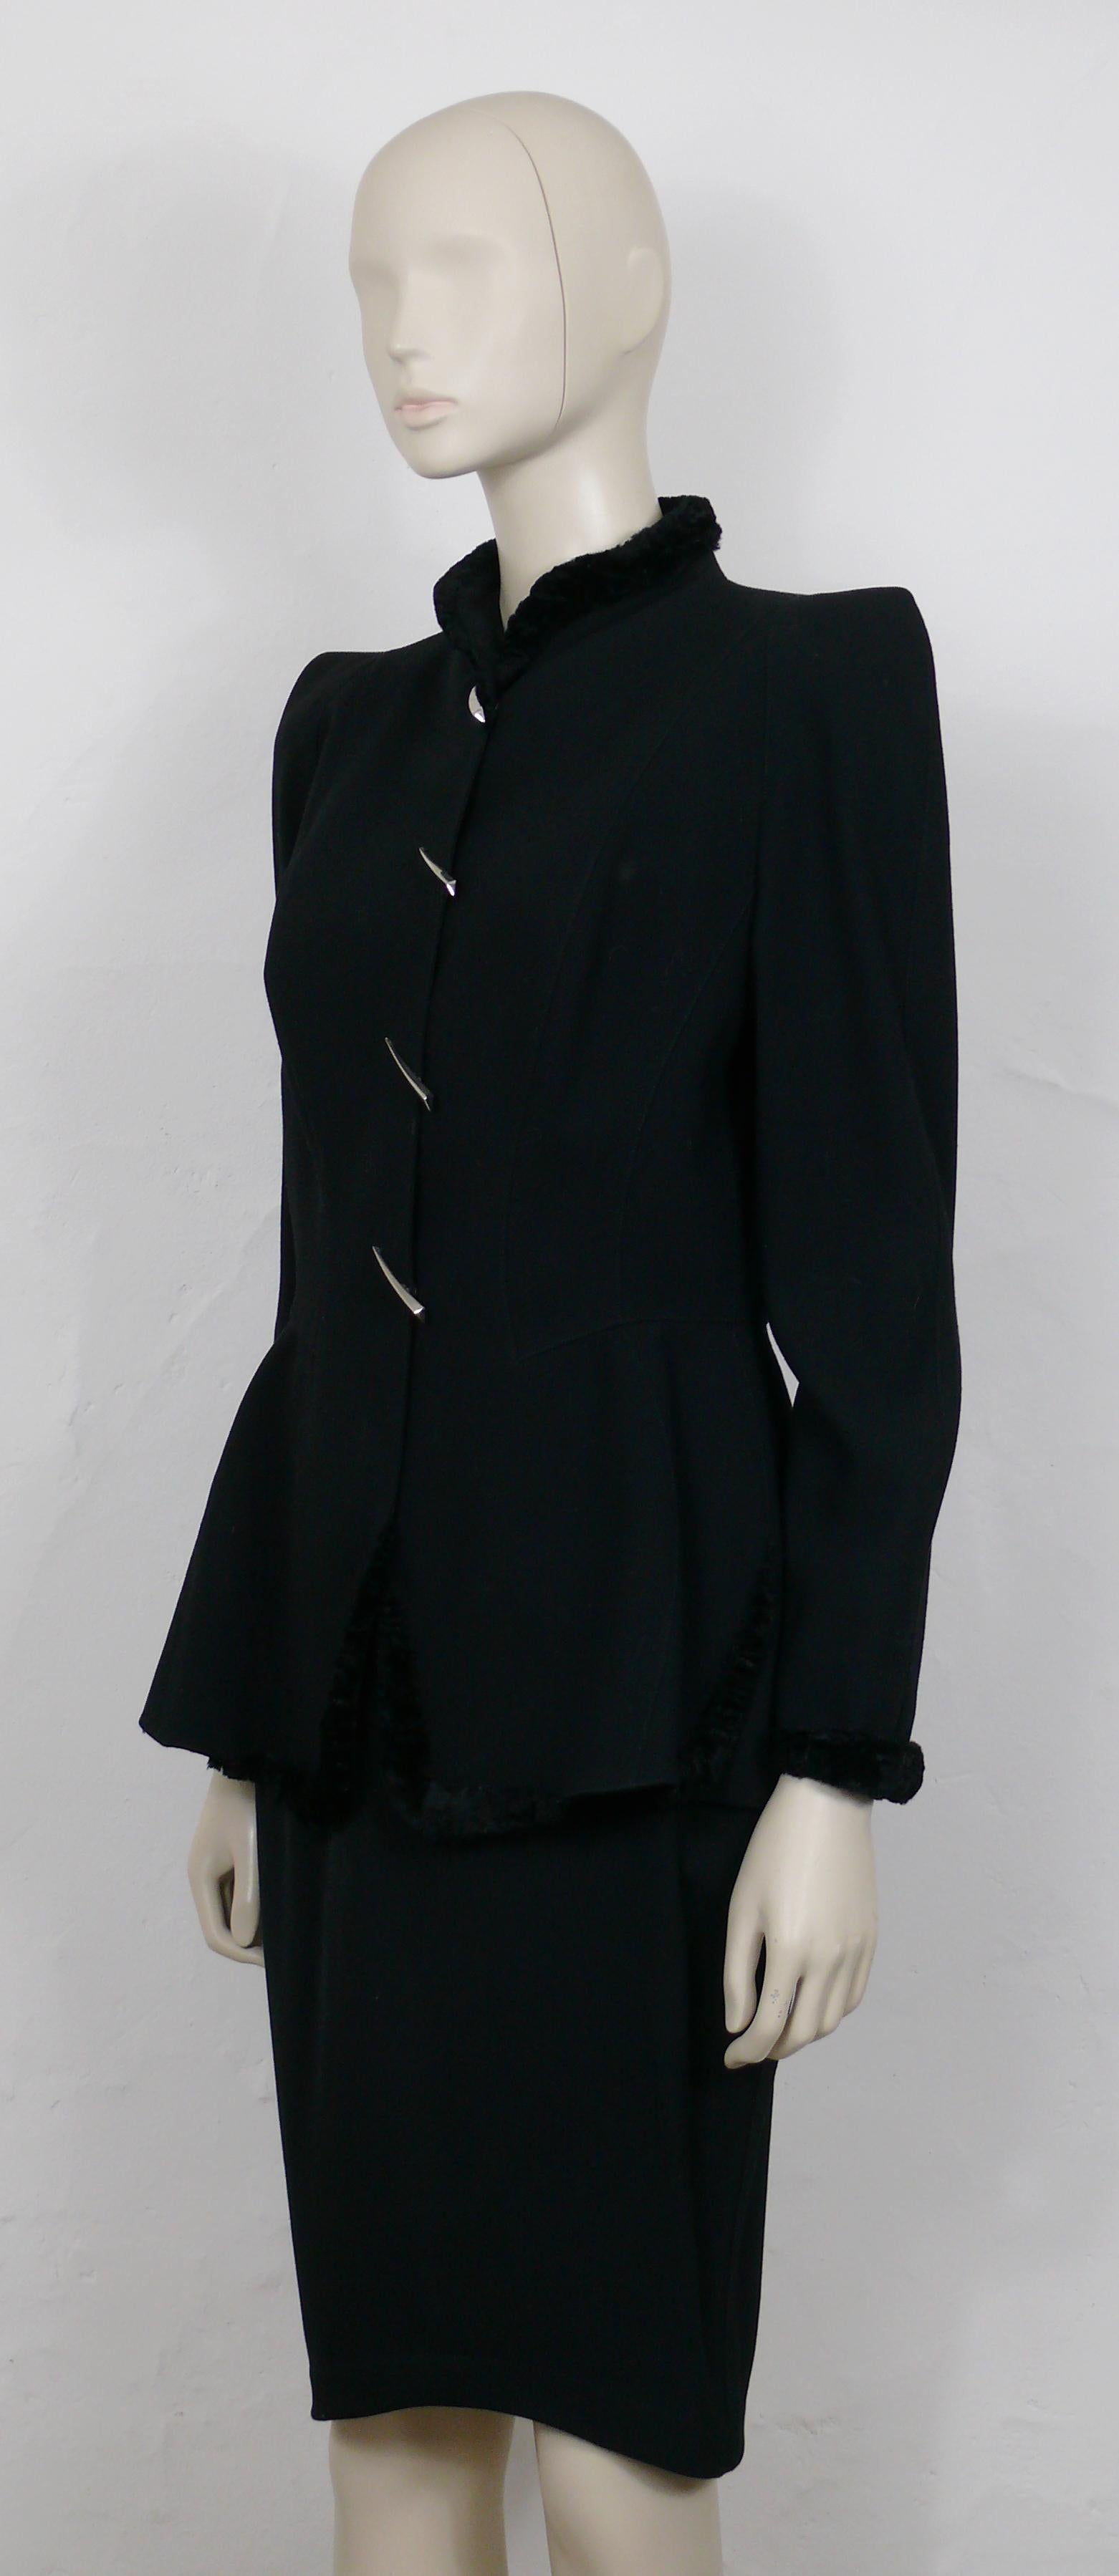 Thierry Mugler Vintage Black Wool & Claw Ornaments Skirt Suit For Sale 4